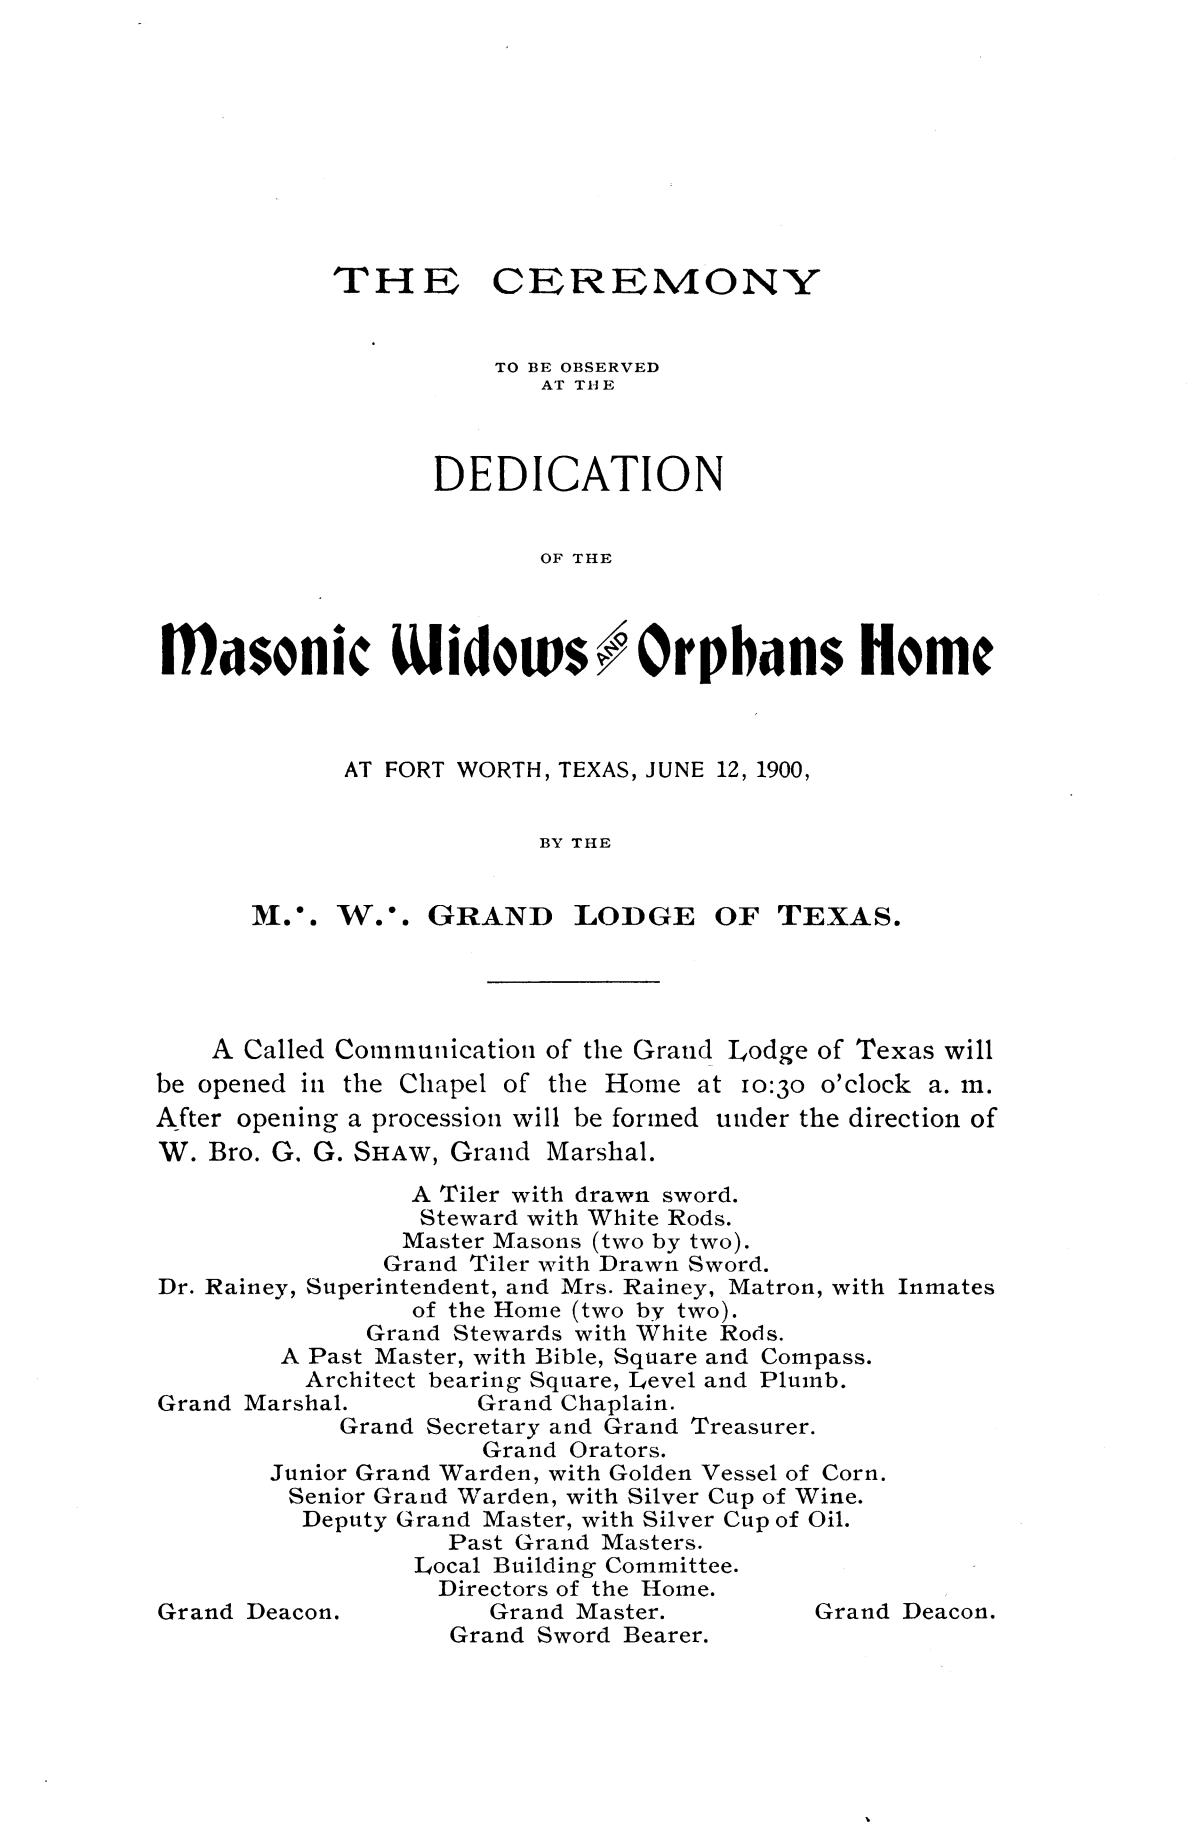 The ceremony to be observed at the dedication of the Masonic Widows and Orphans Home, Fort Worth, Texas, June 12, 1900, by the M. W. Grand Lodge of Texas
                                                
                                                    1
                                                